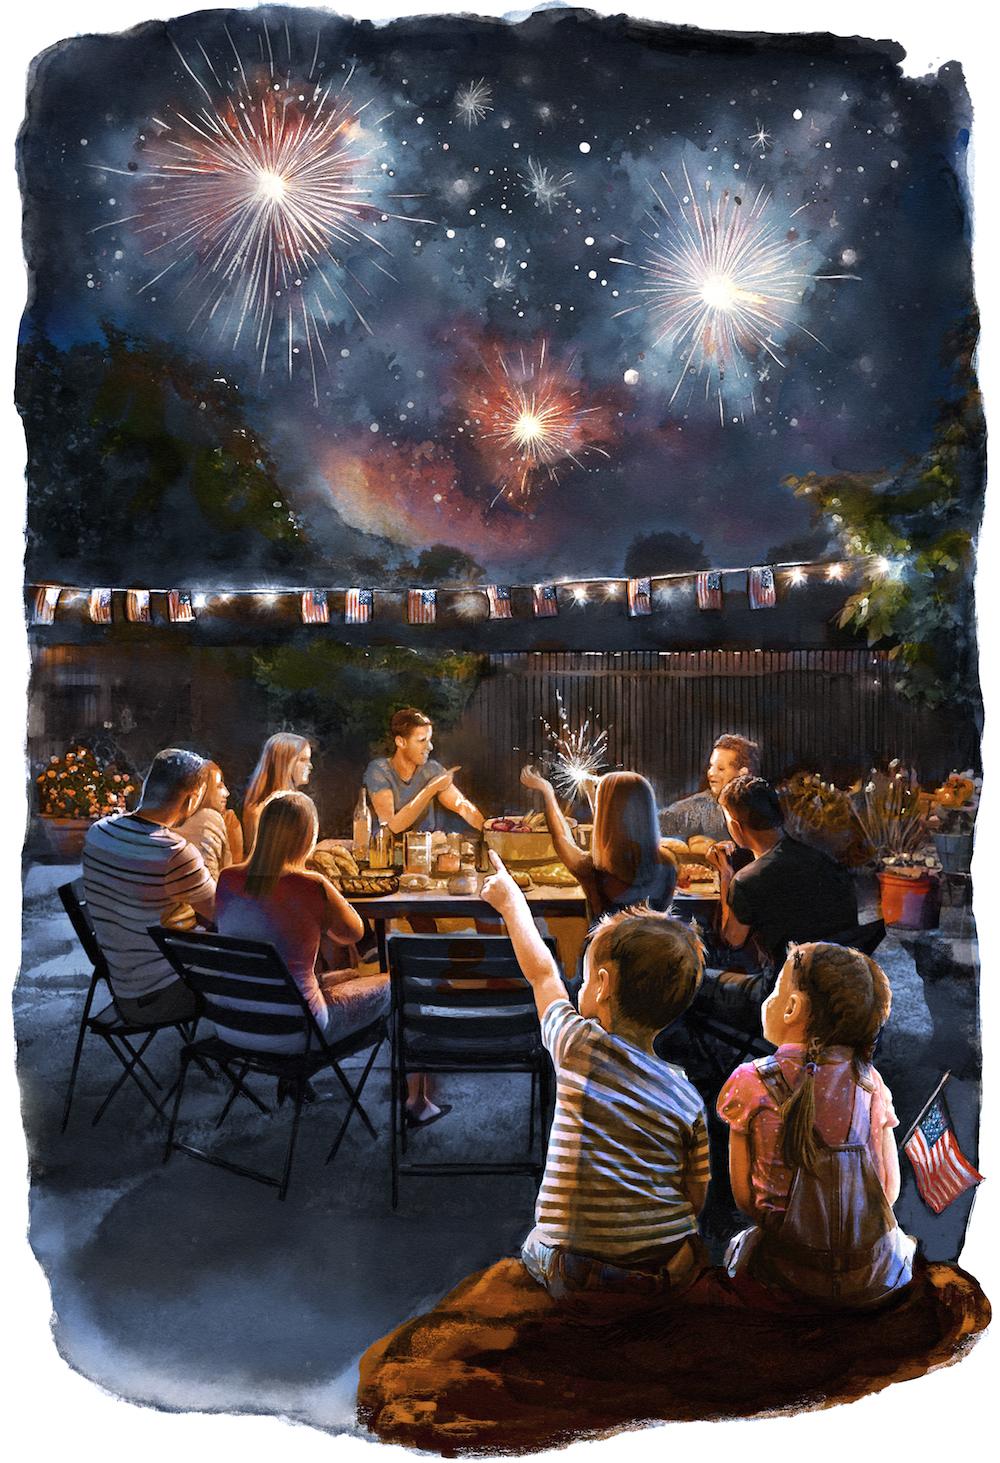 Independence Day is a time for gatherings in the form of barbecues, picnics, and potlucks, where friends and family can celebrate American liberty. (Biba Kayewich)